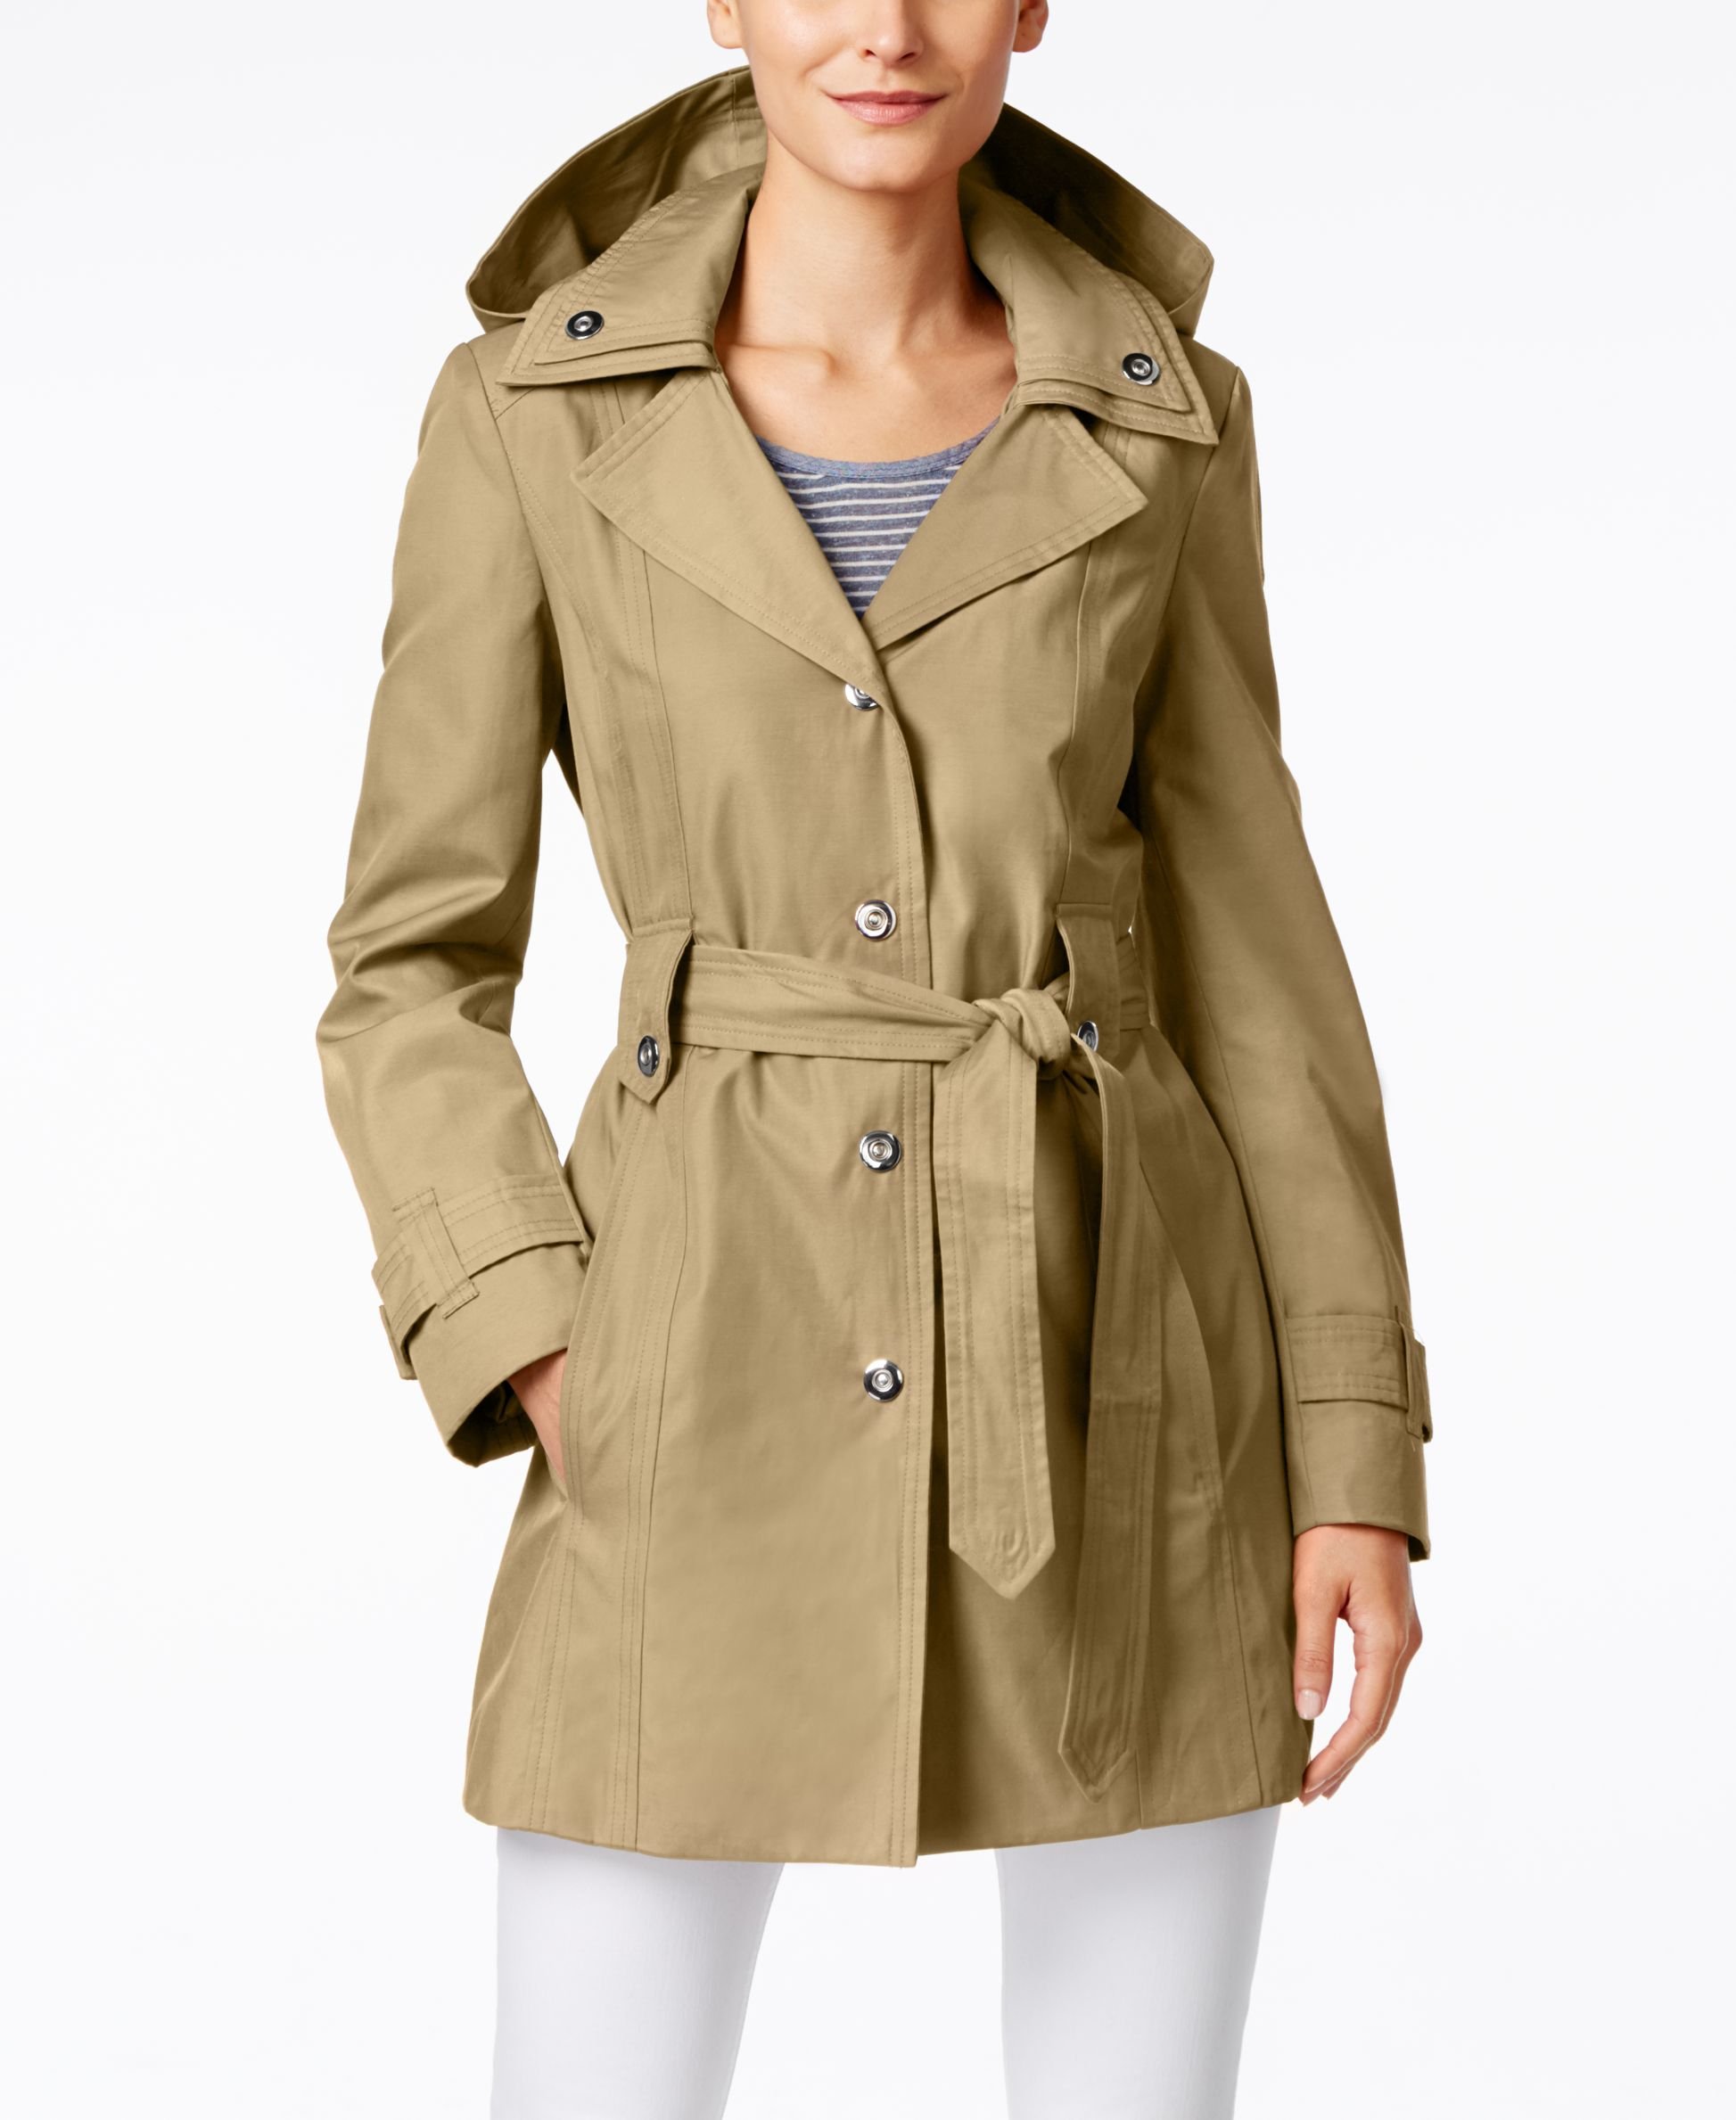 Lyst - London Fog Snap-button Hooded Trench Coat in Green